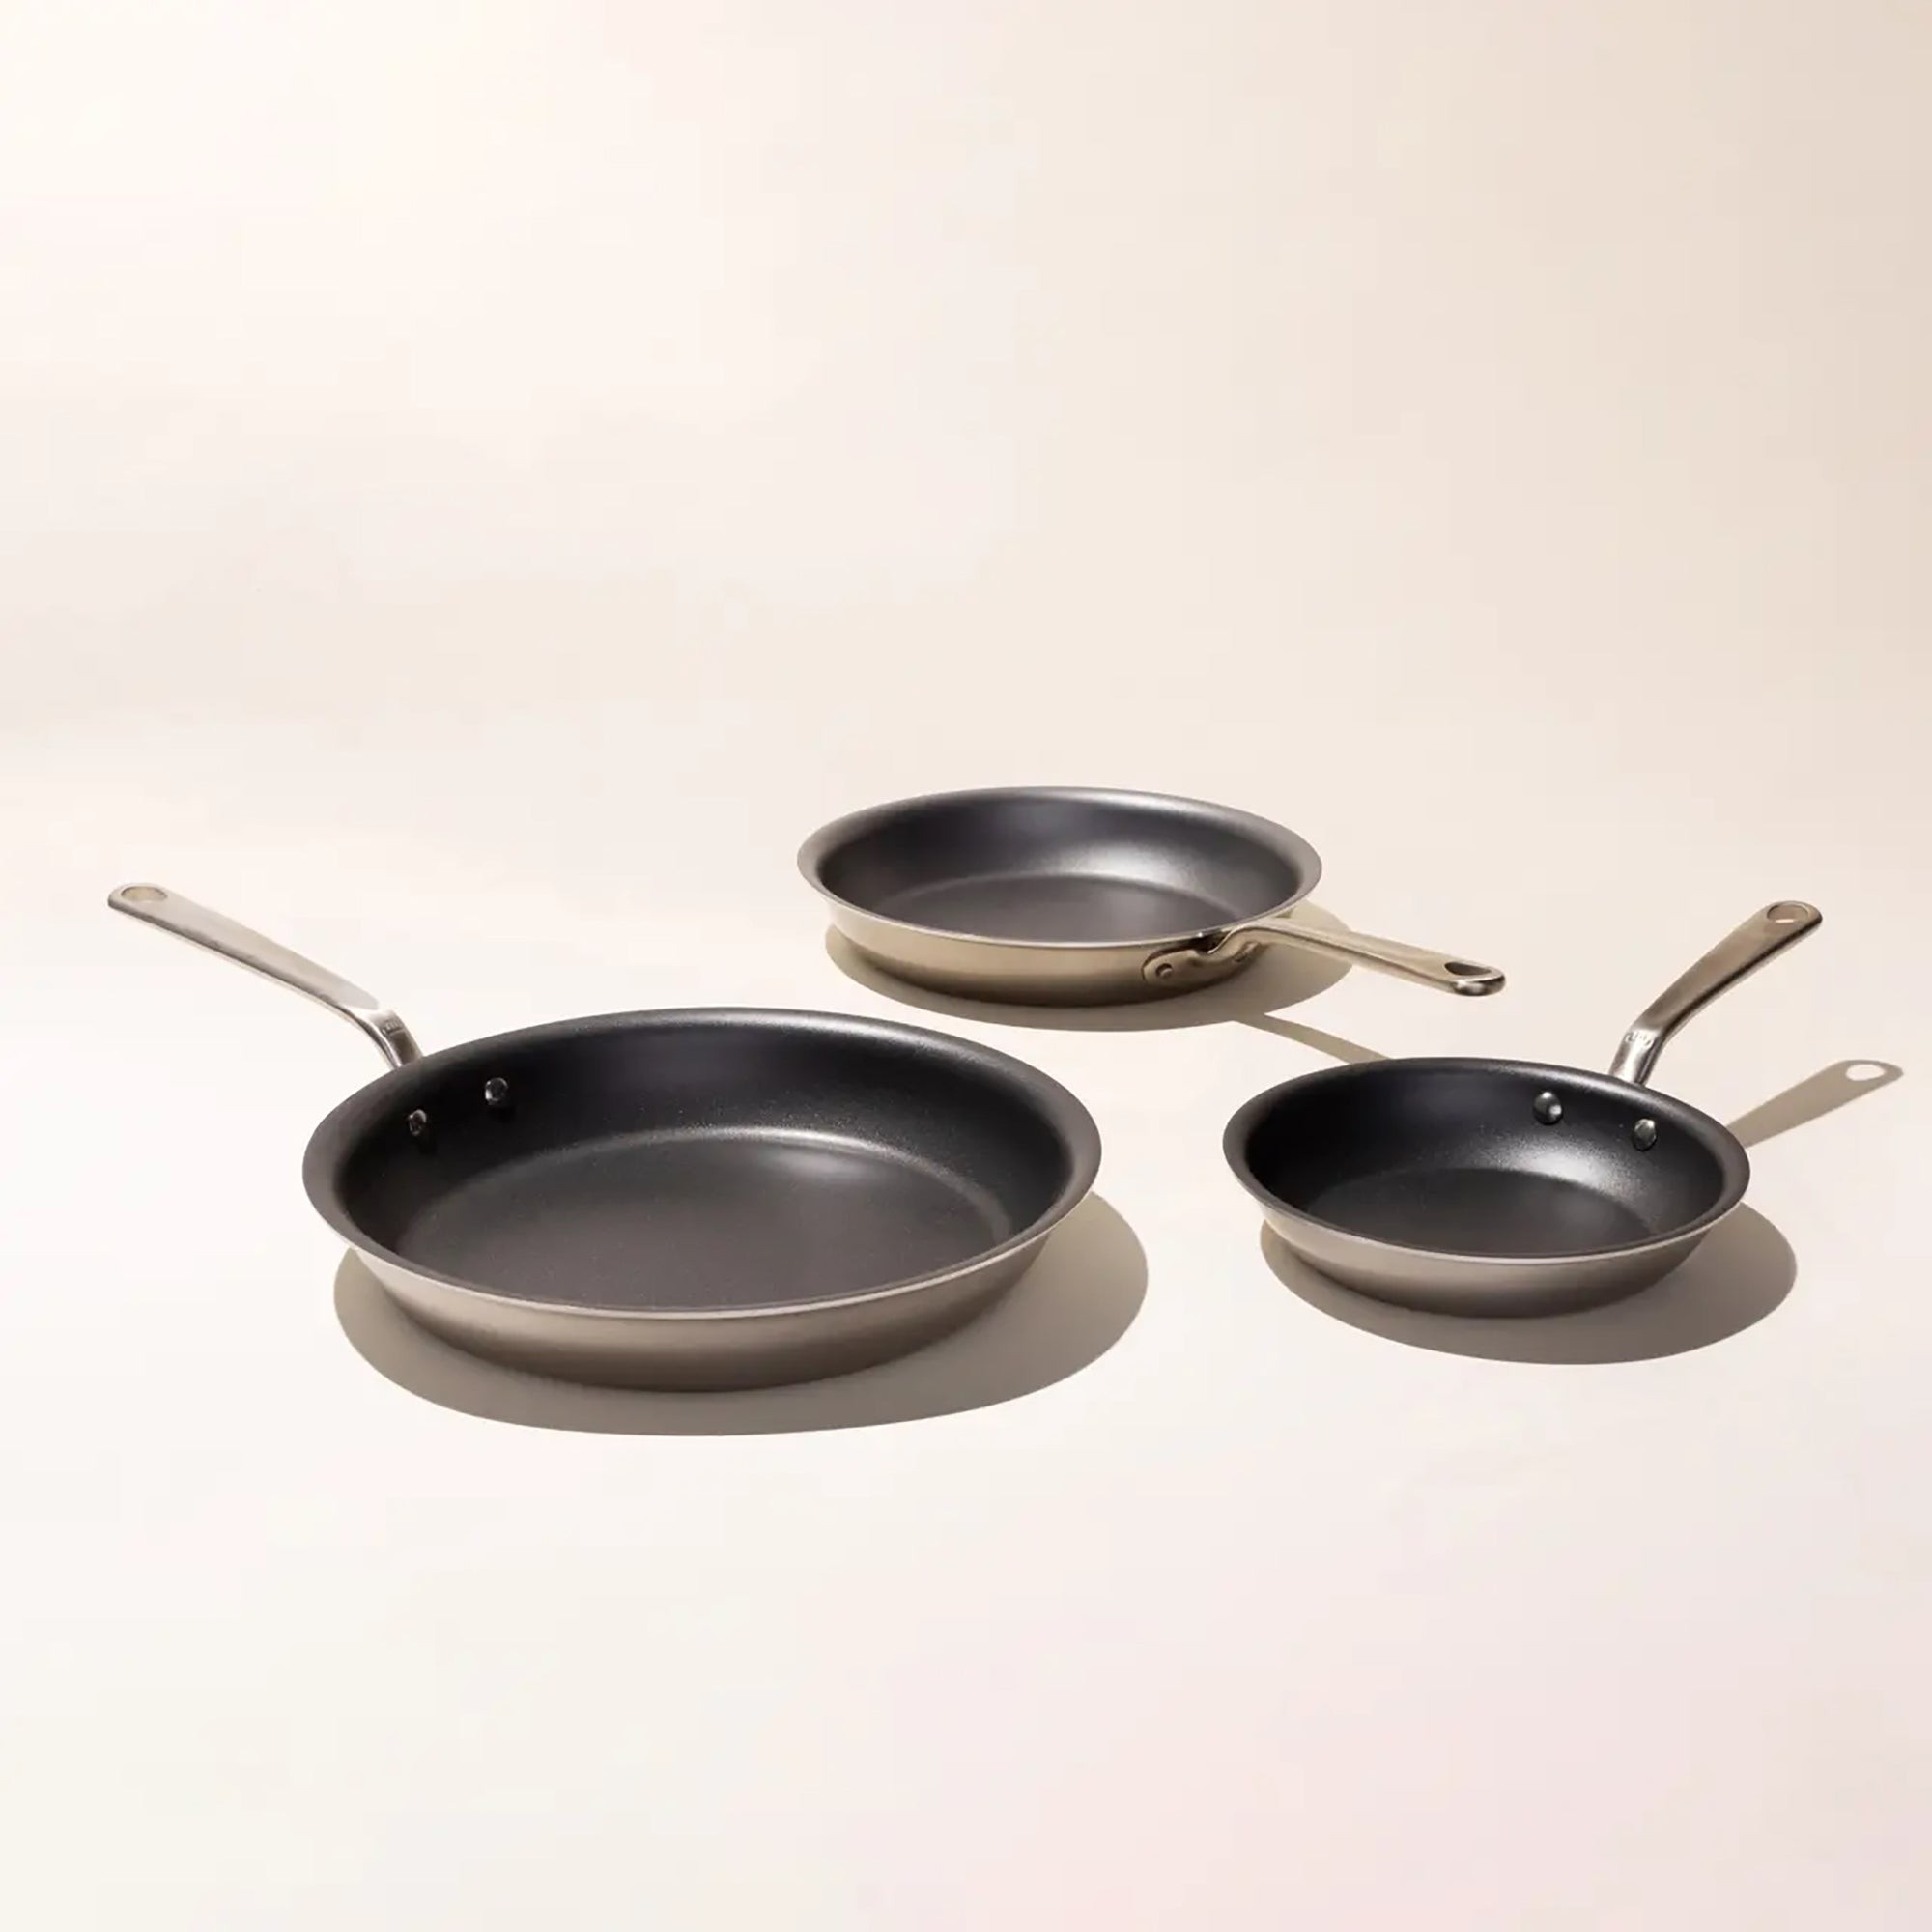 3pc 5-Ply Stainless Clad Nonstick Frying Pans (Made in the USA) Graphite